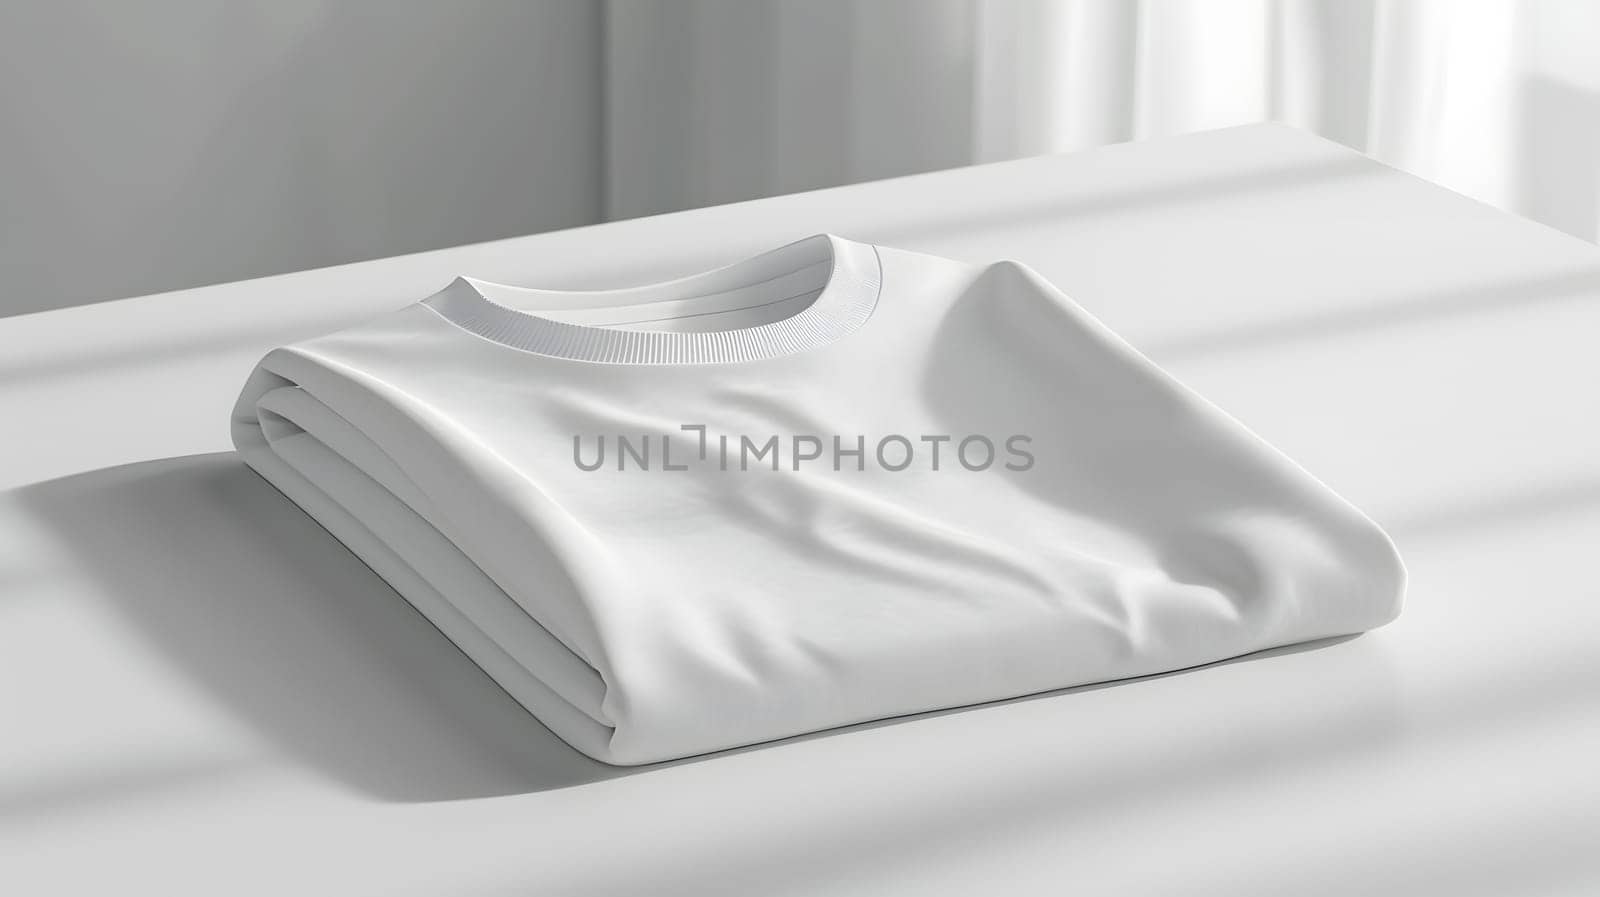 A cozy grey folded tshirt lies on a sleek hardwood table, complementing the automotive design of the room. The monochrome photography enhances the modern aesthetics of the space